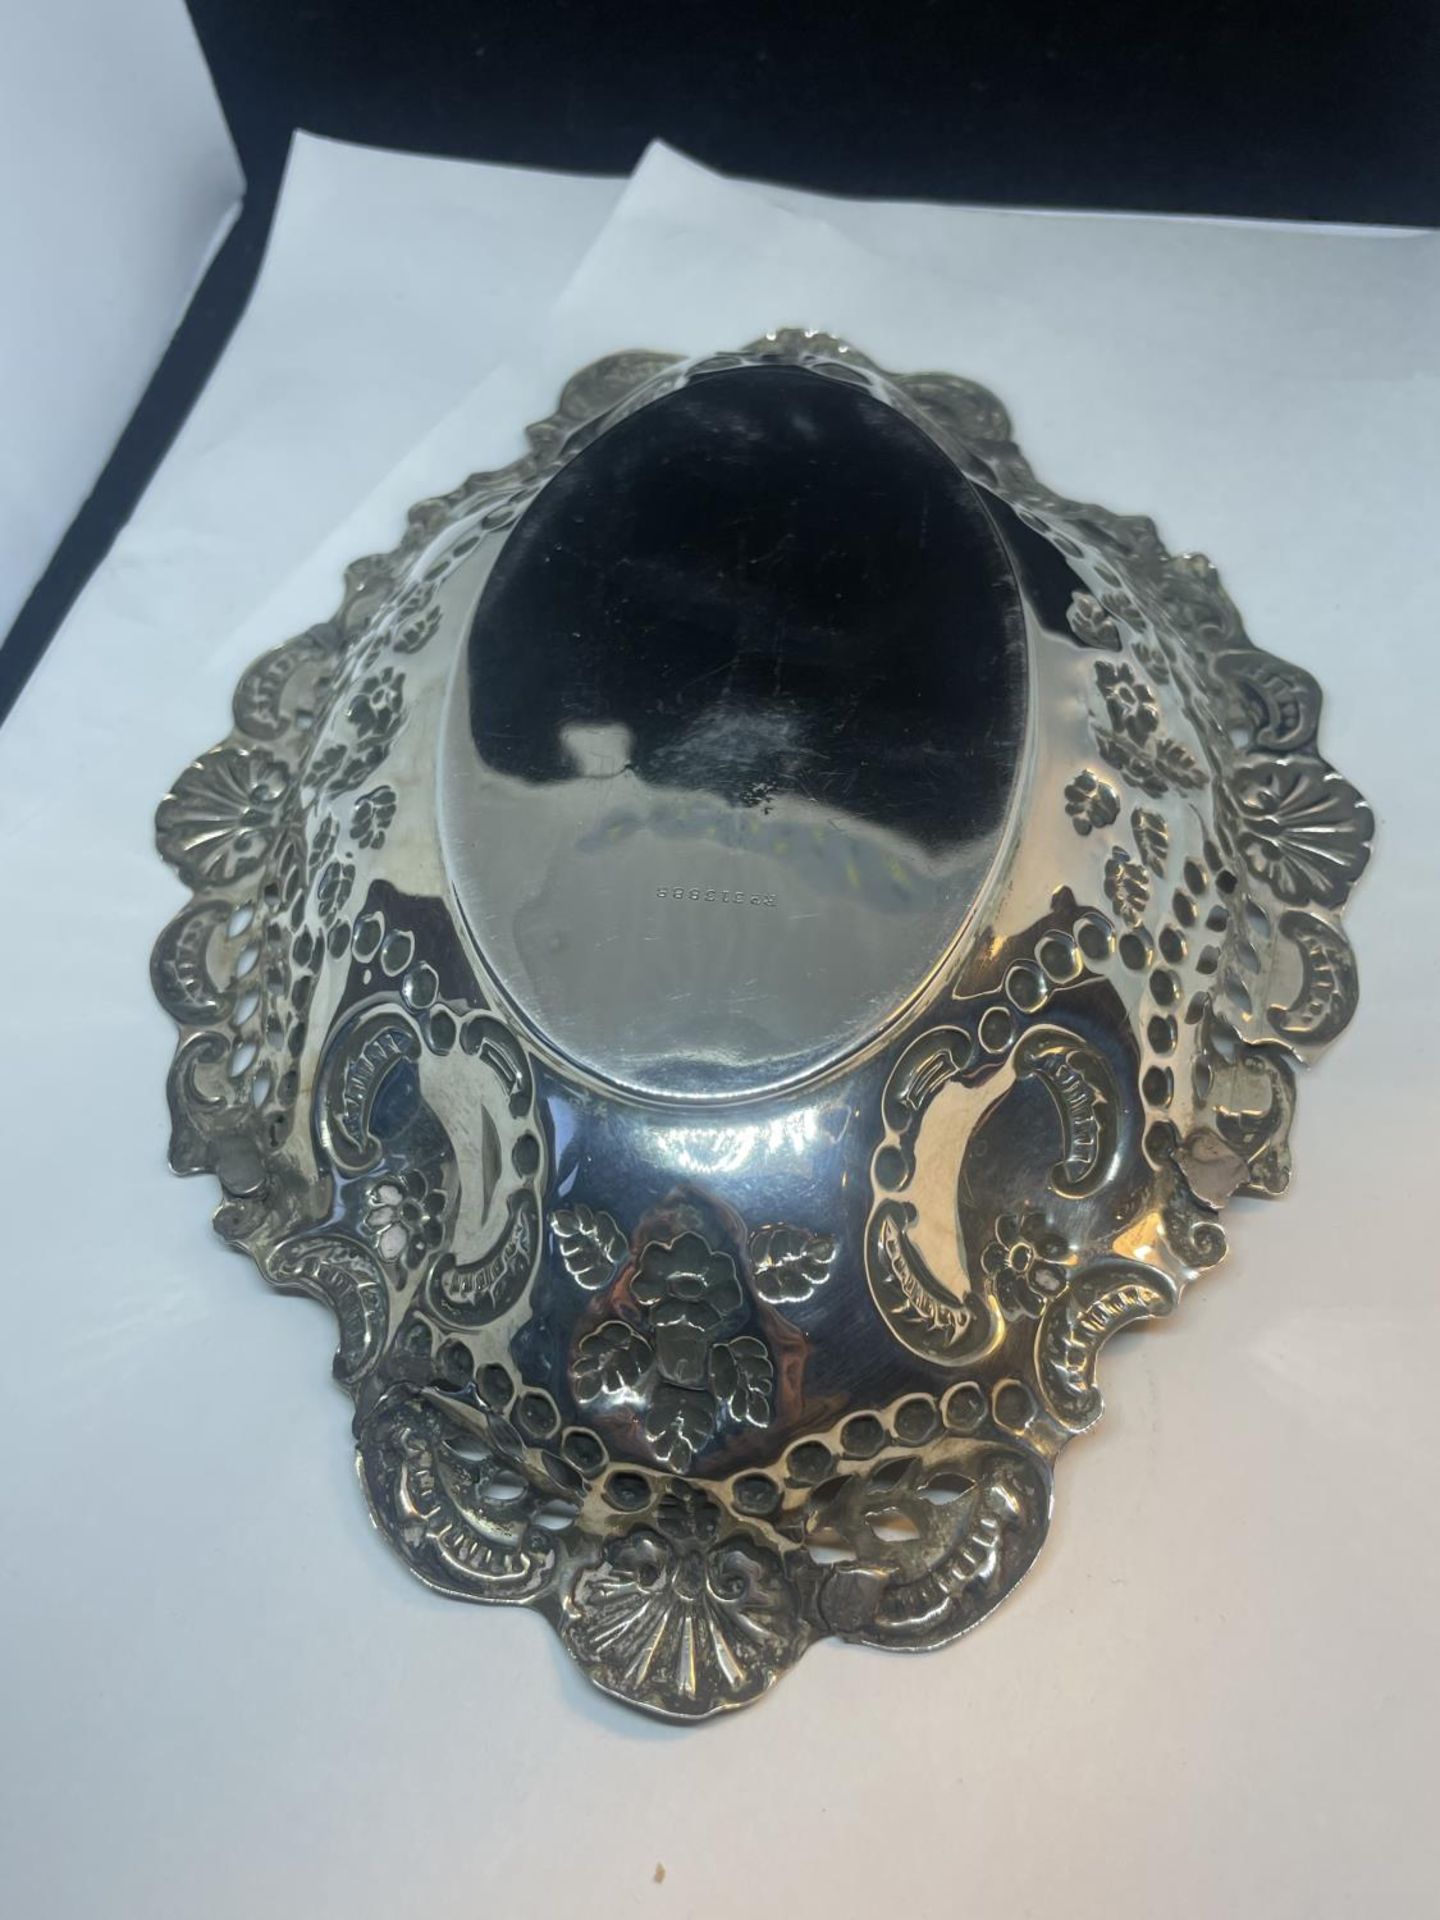 A DECORATIVE HALLMARKED SHEFFIELD SILVER DISH GROSS WEIGHT 124 GRAMS - Image 5 of 5